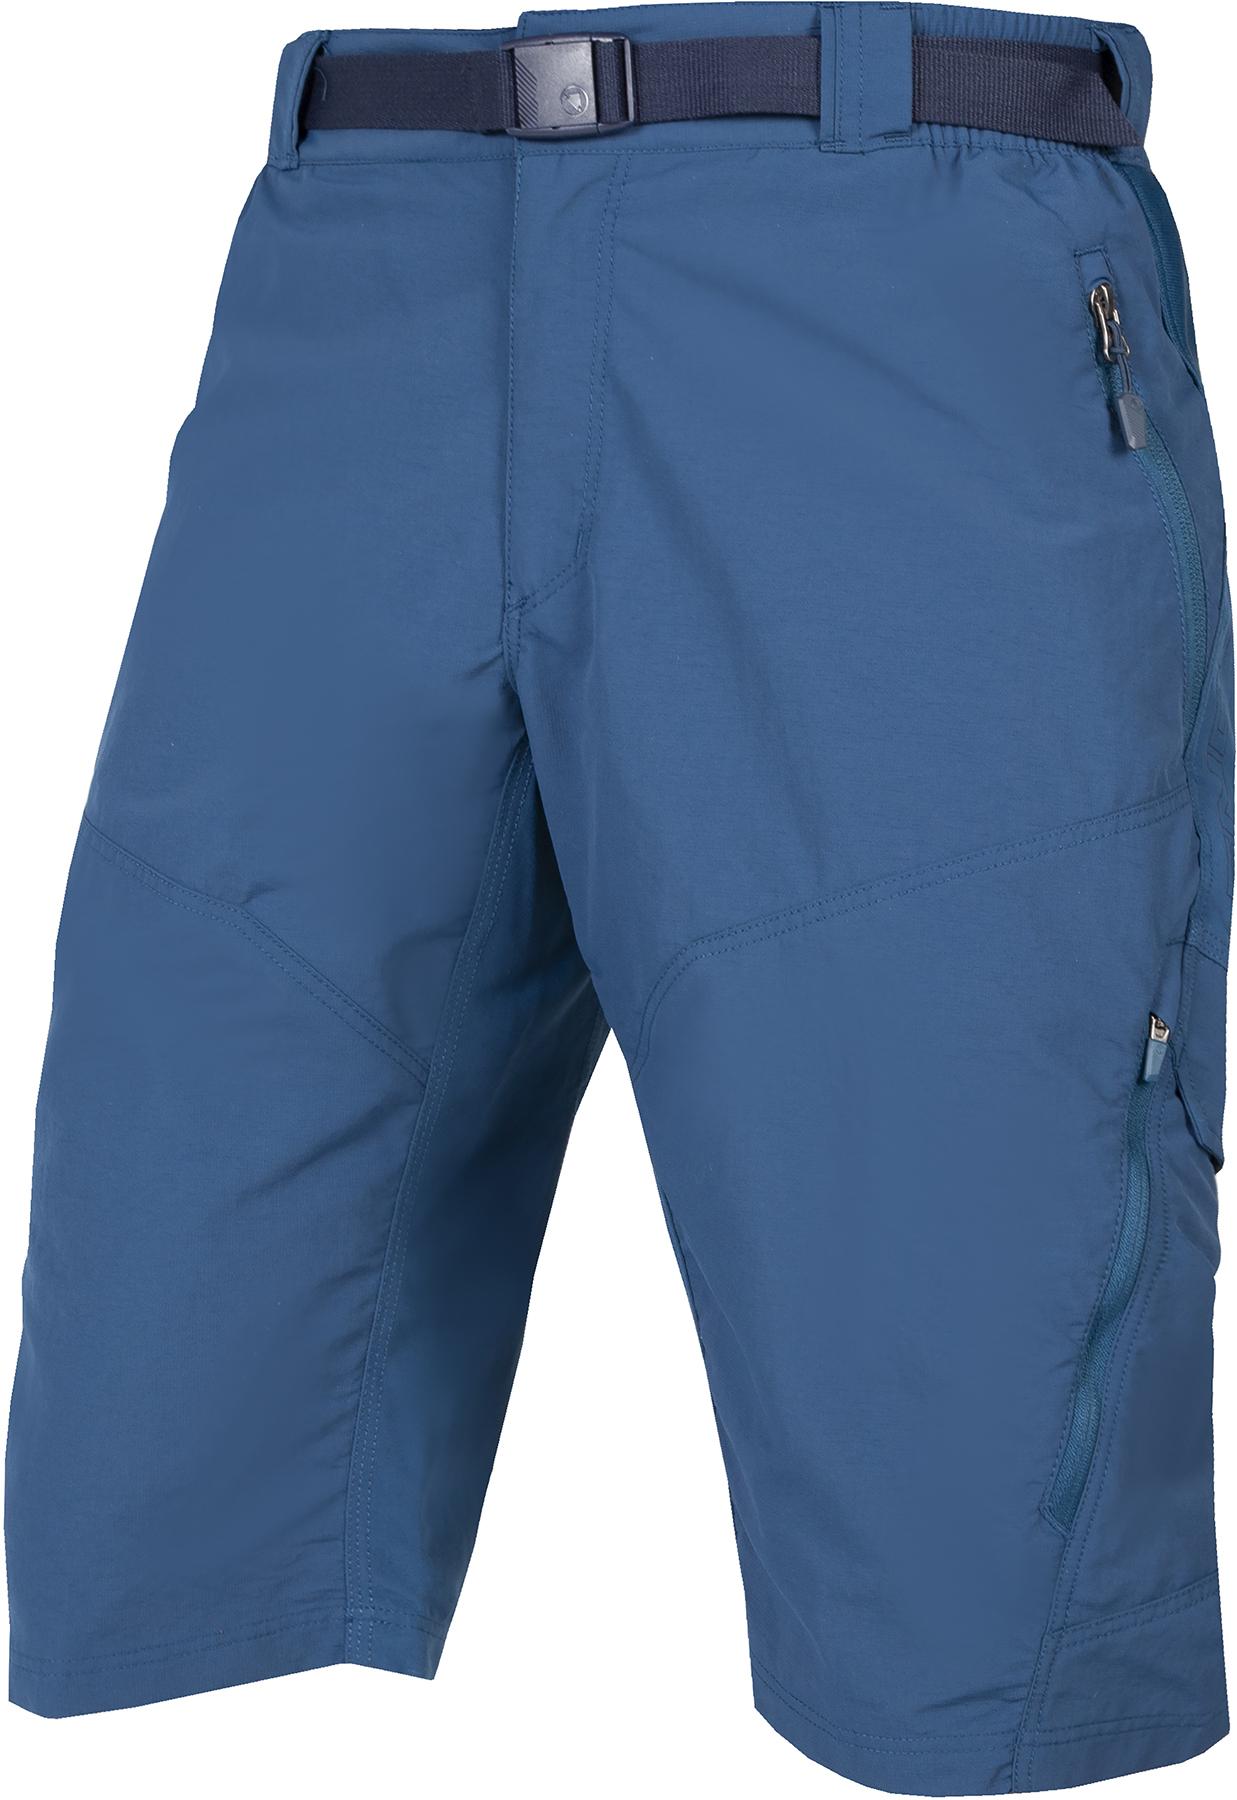 Endura Hummvee Short With Liner - Blueberry